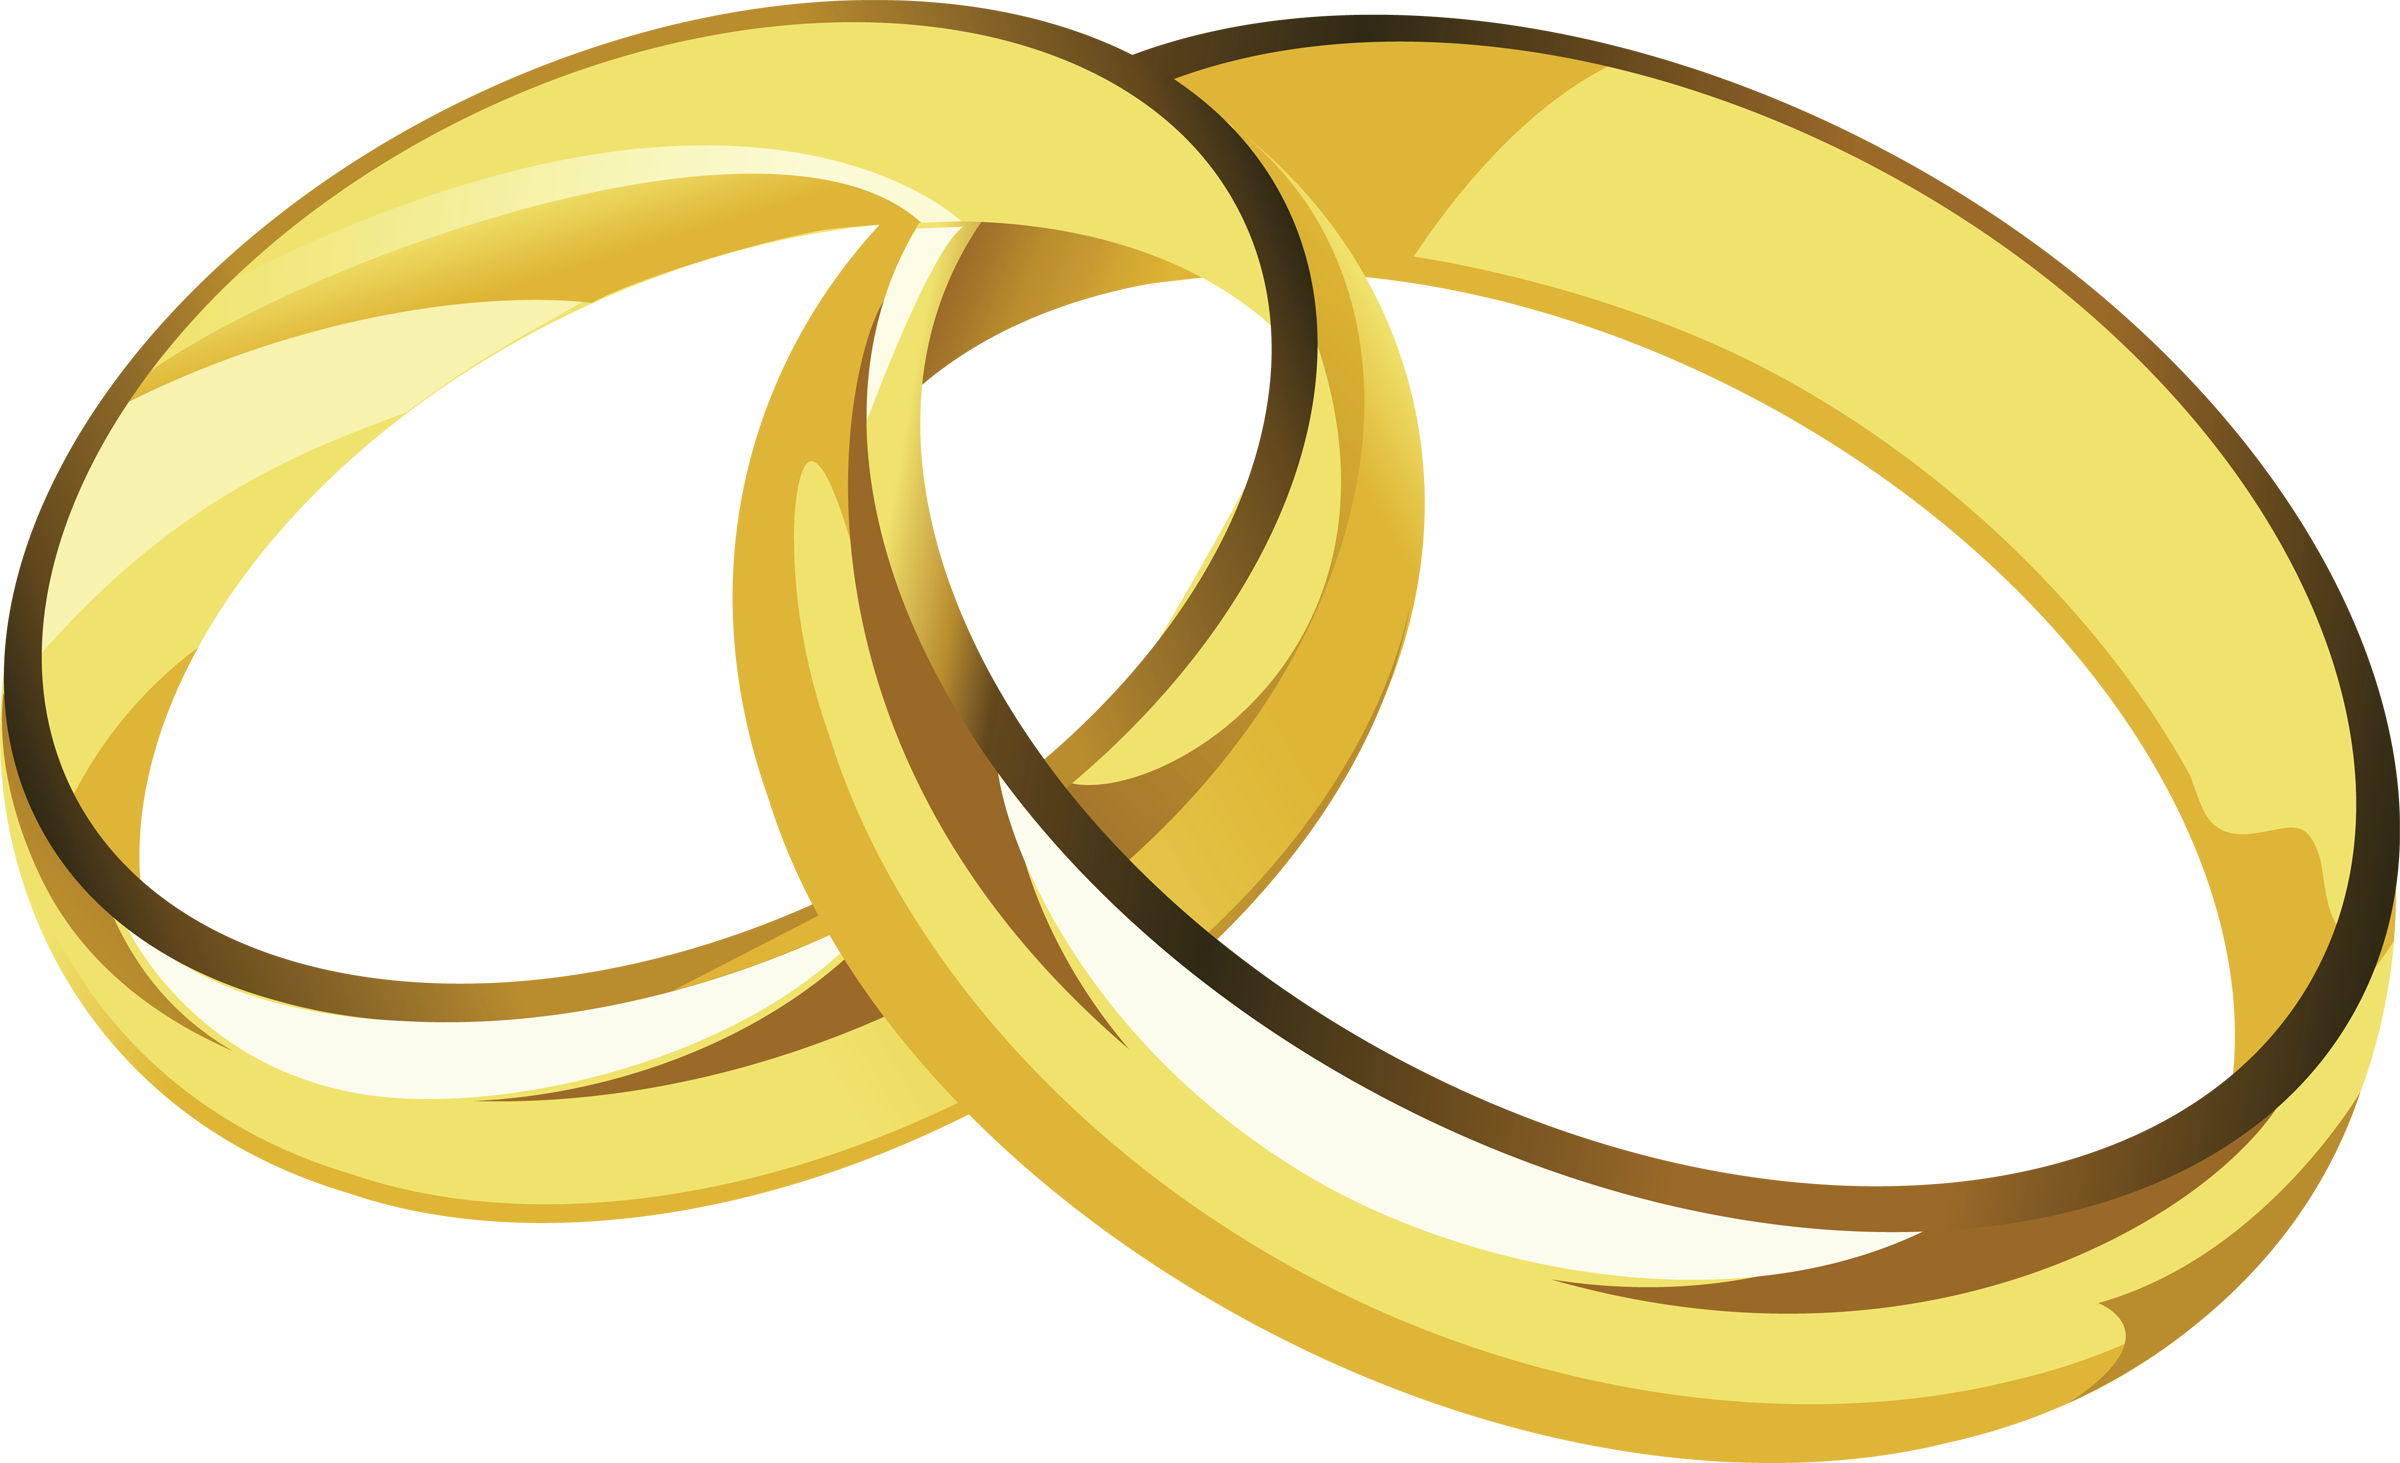 Wedding Ring Drawing - ClipArt Best